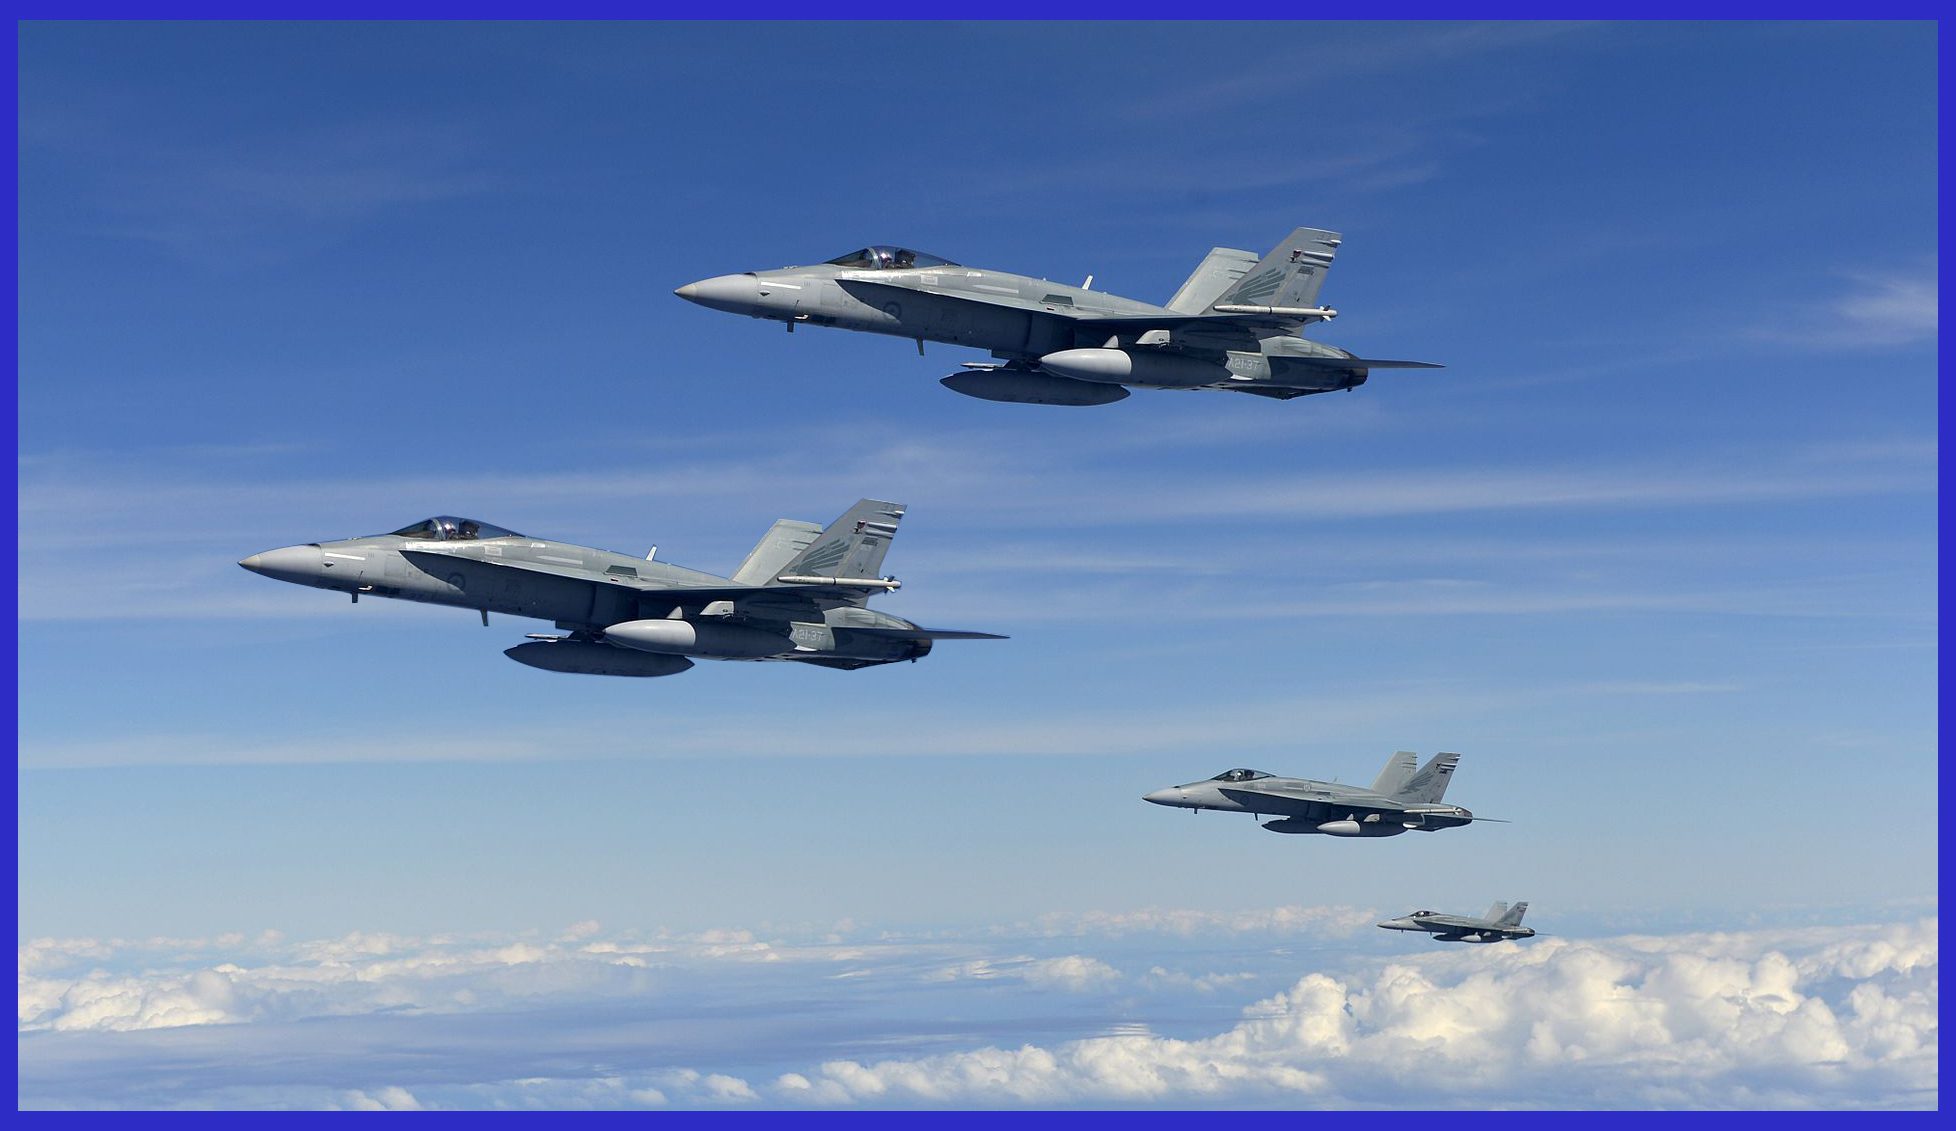 Photo Credit: RAAF / Four RAAF F/A-18E Hornets in Formation, Armed with Mighty Advanced SRAAMs on Their Wing Tips